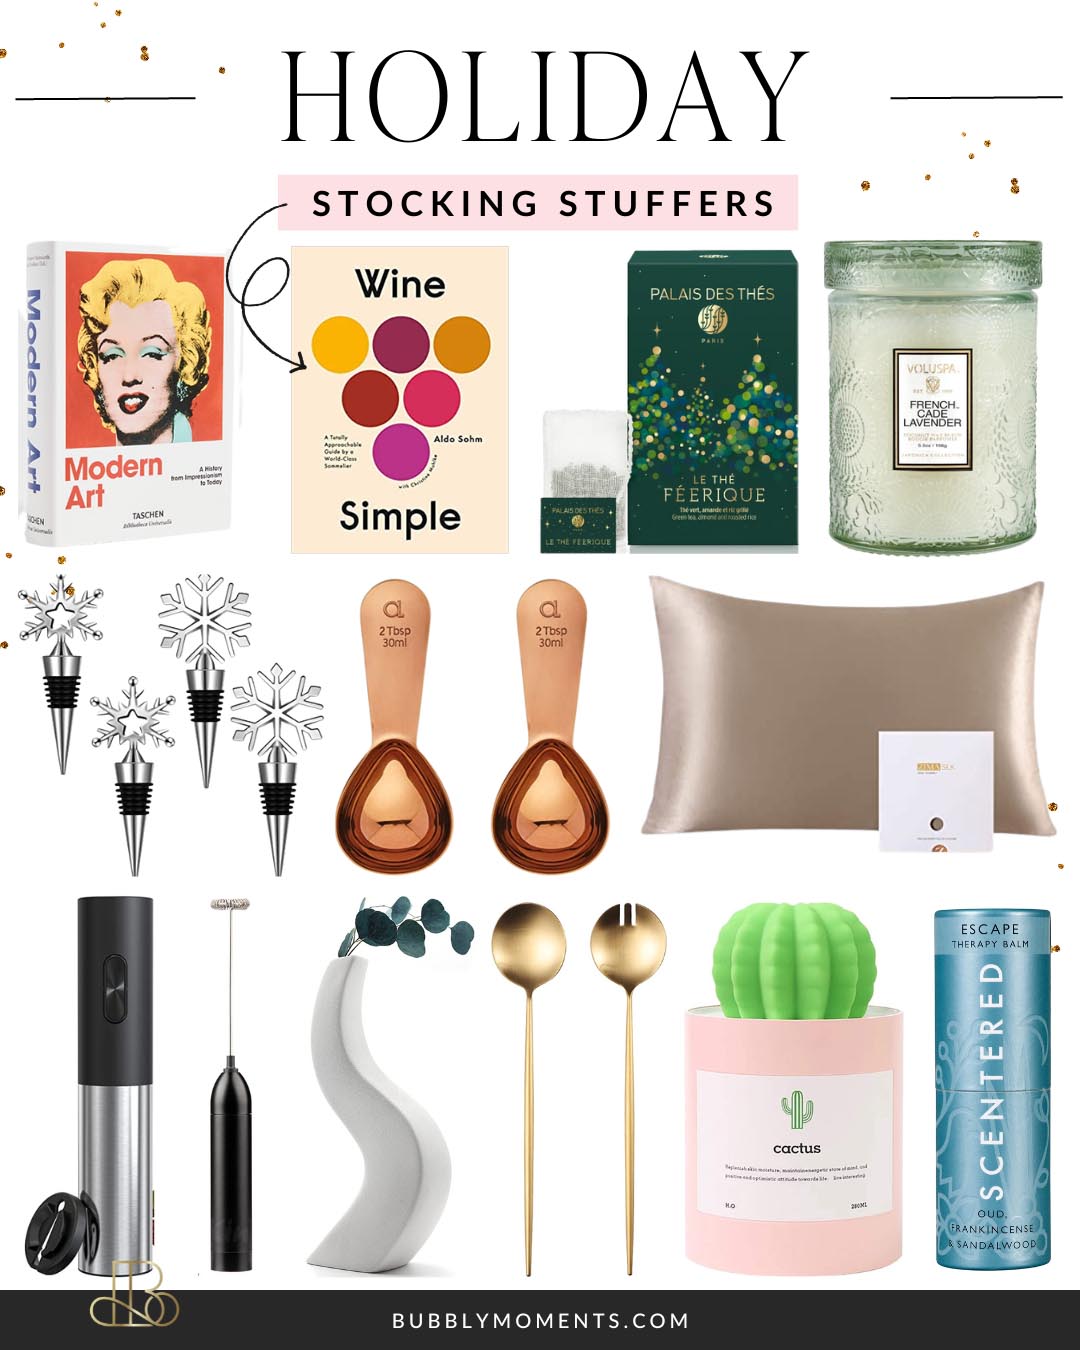 The best stocking-stuffers: Gifts for $25 or less - CNET